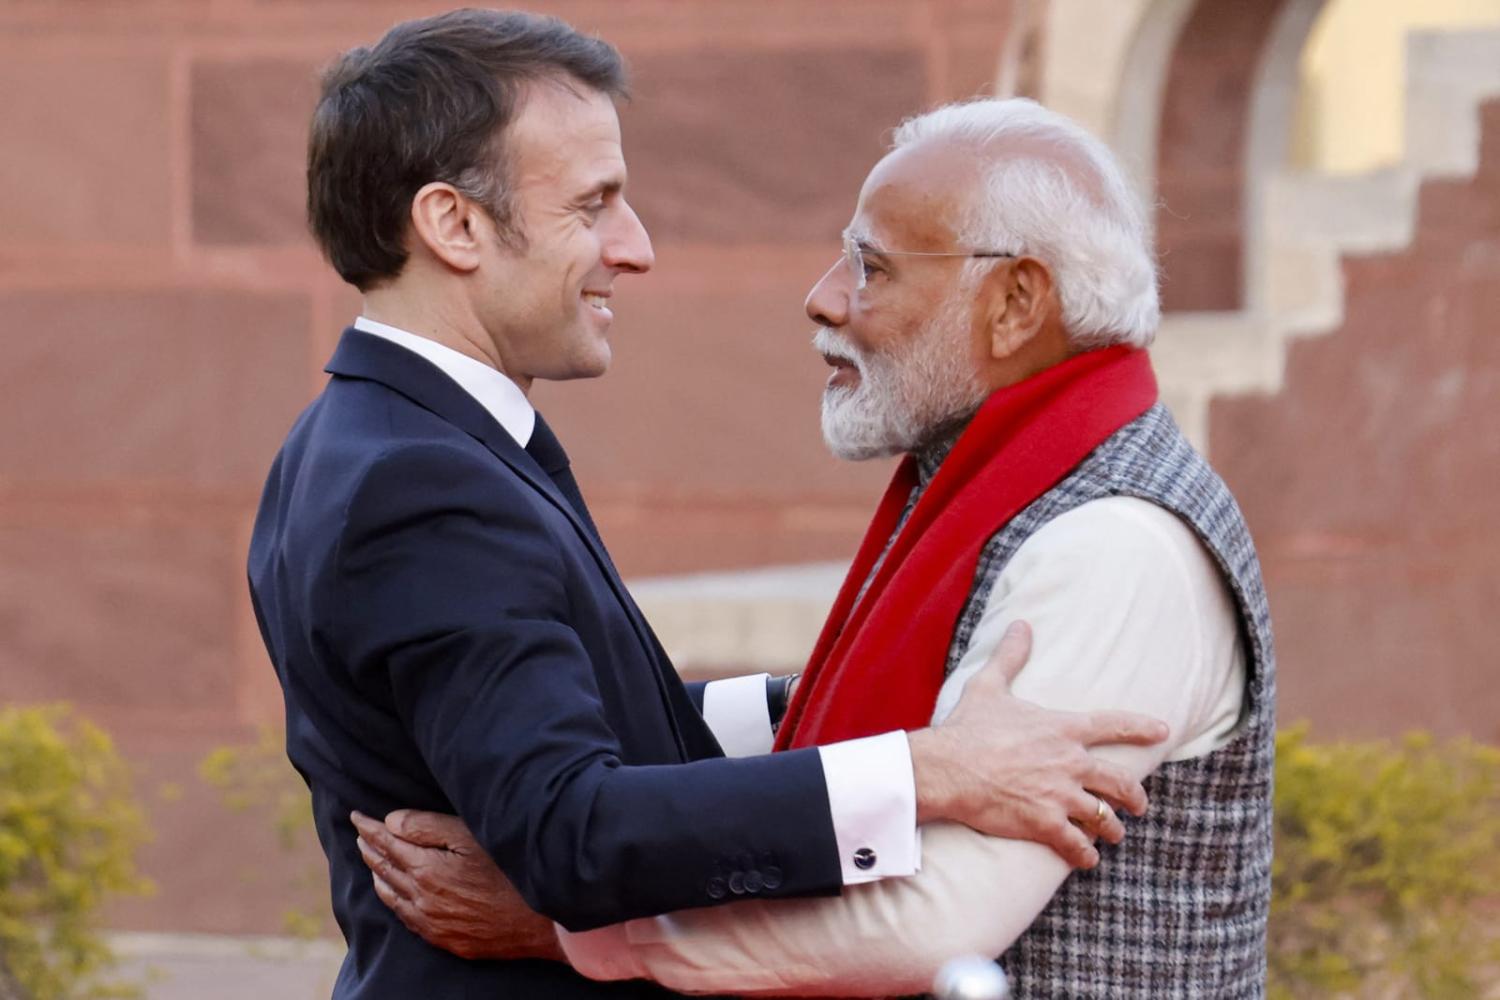 India's Prime Minister Narendra Modi, right, and France's President Emmanuel Macron embrace during a visit at the Janta Mantar observatory in Jaipur in January (Ludovic Marin/AFP via Getty Images)